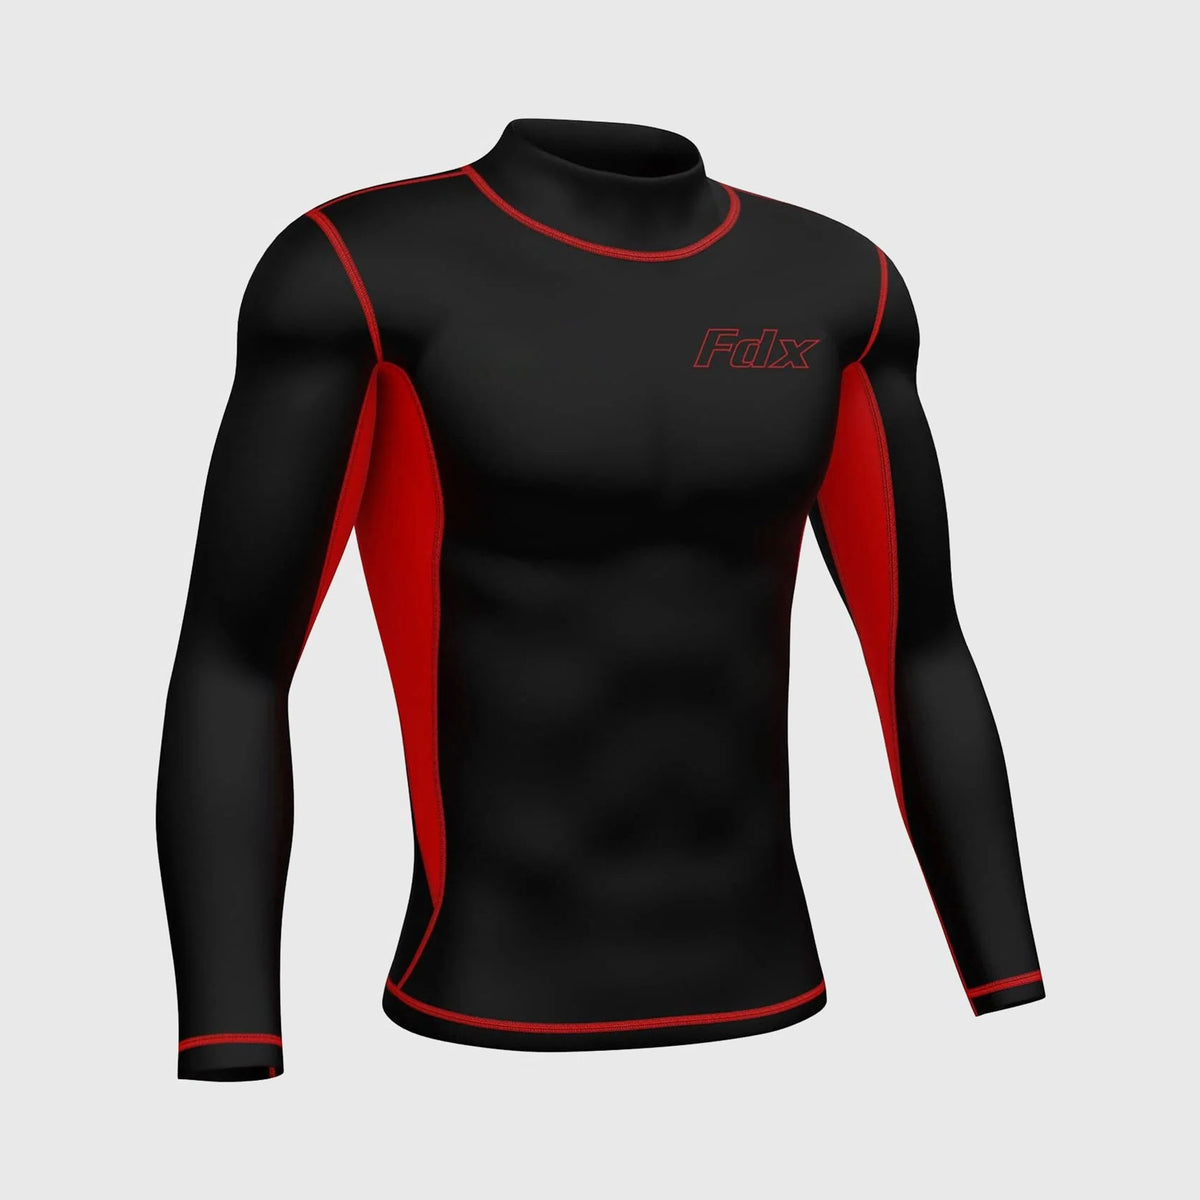 Fdx Inorex Men's Long Sleeve Thermal Winter Cycling Top Red